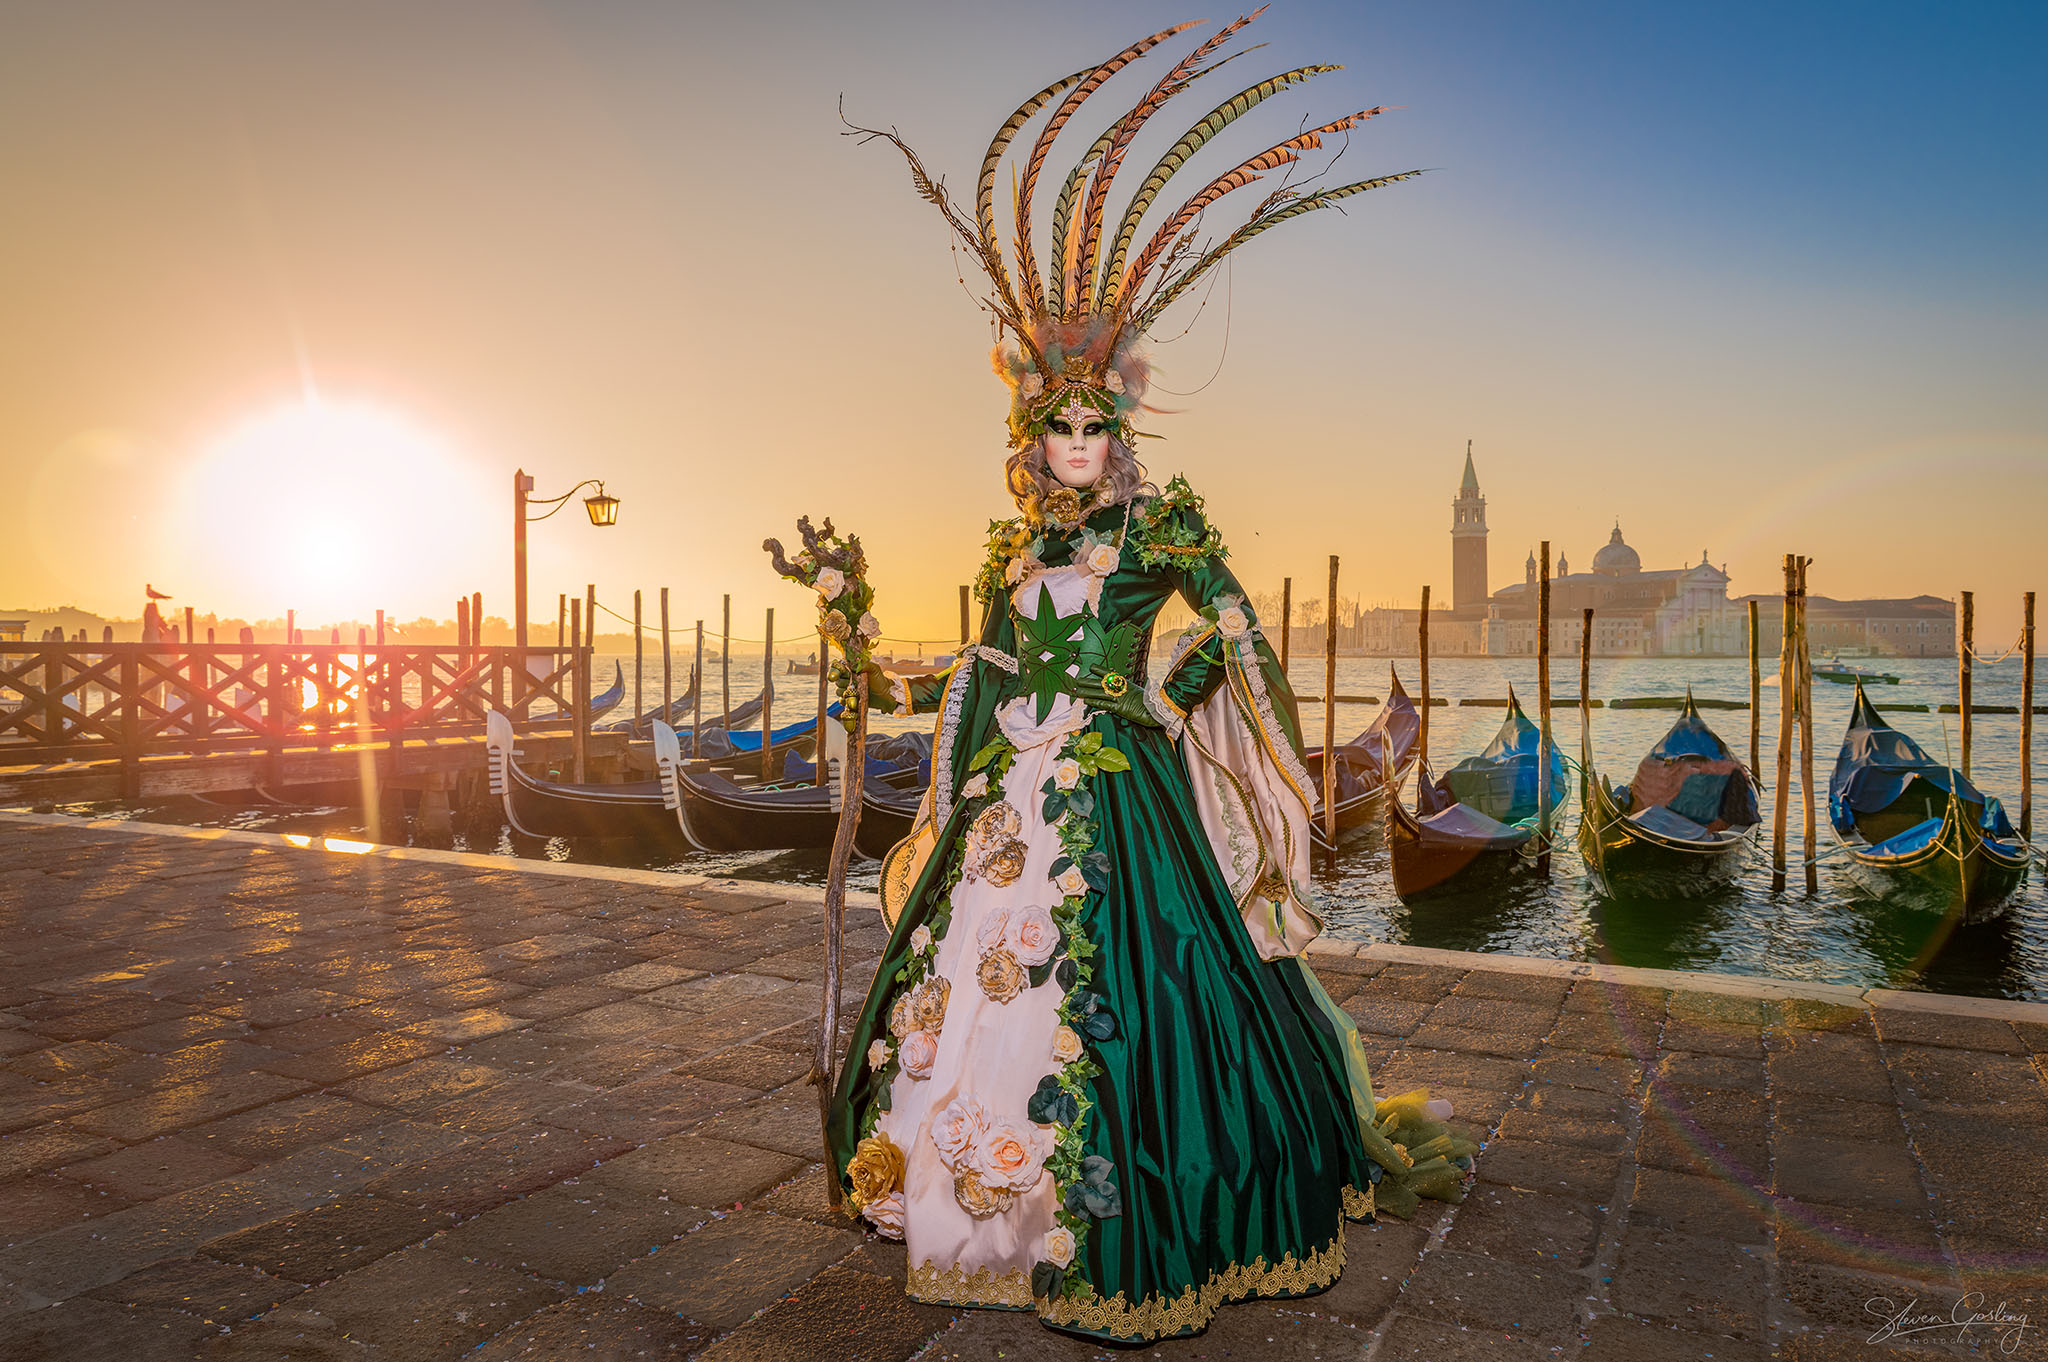 Ballet & Ball Gowns Photography Workshop at the Venice Carnival 168